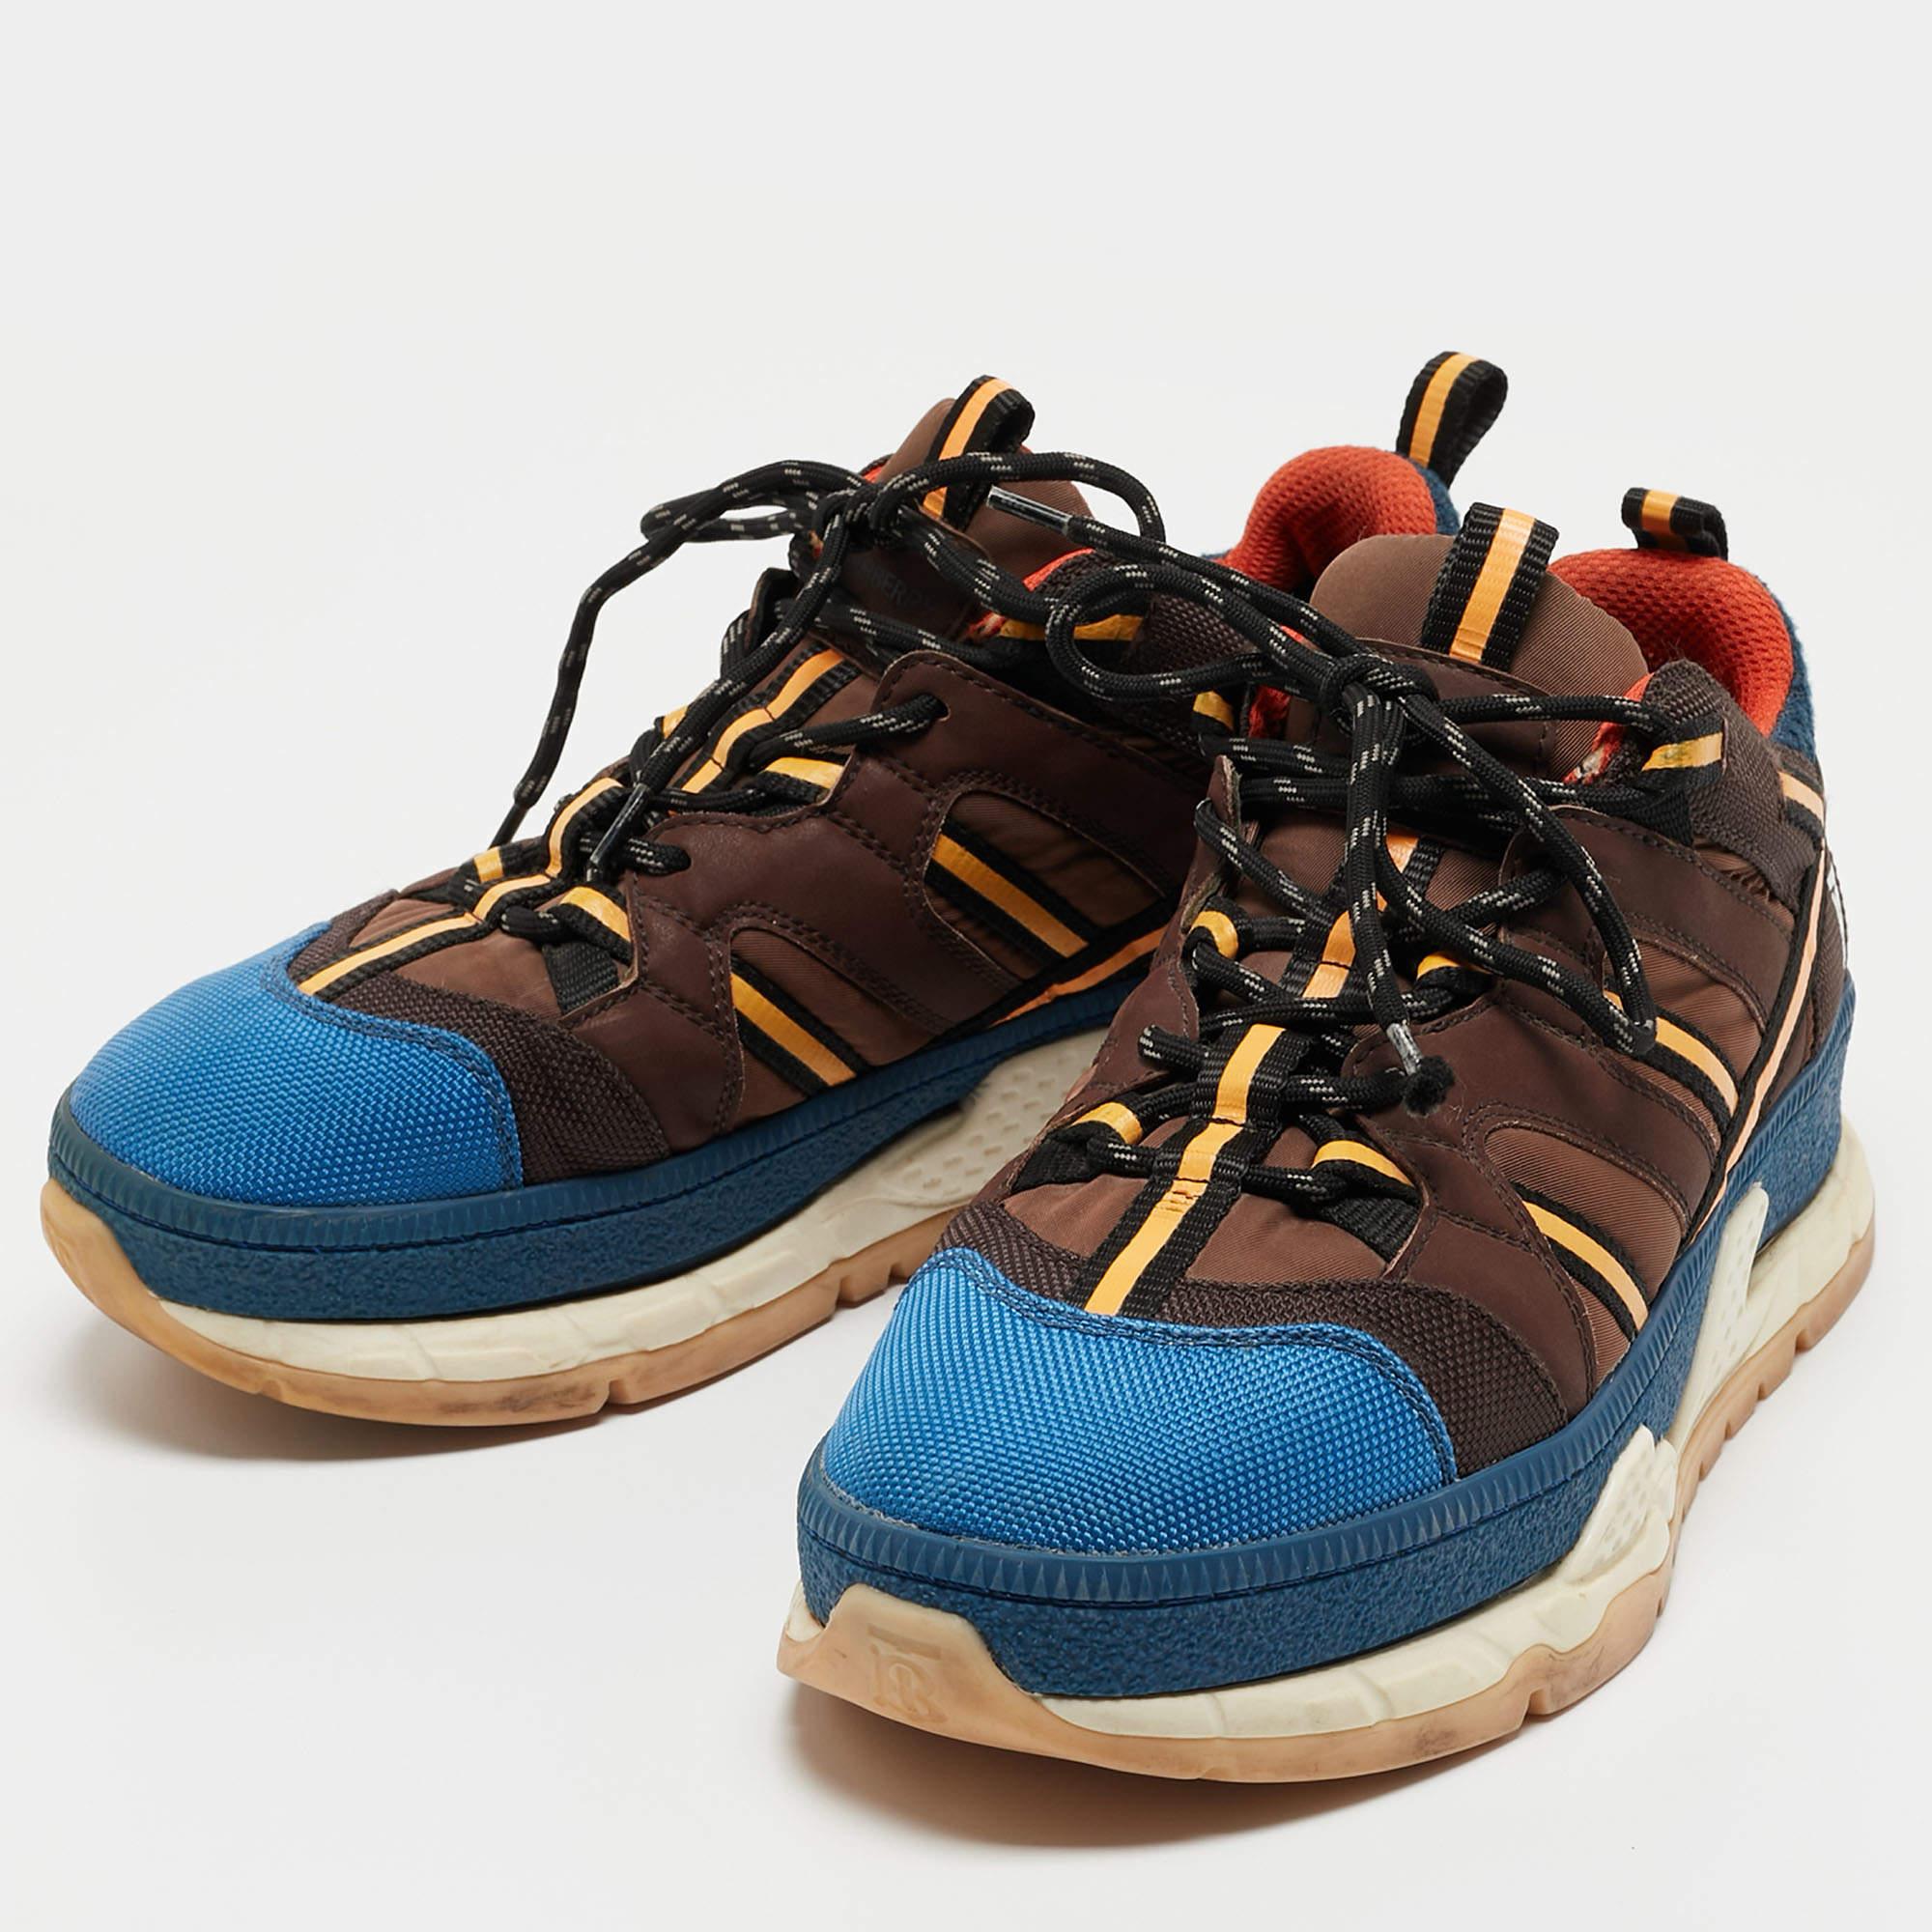 Now look fashionable even in your casuals! Beautifull crafted from canvas, these sneakers flaunt a color block design with a lace-up vamp, elevated midsoles and the label on the counters. Grab this Burberry creation today and team them up with your